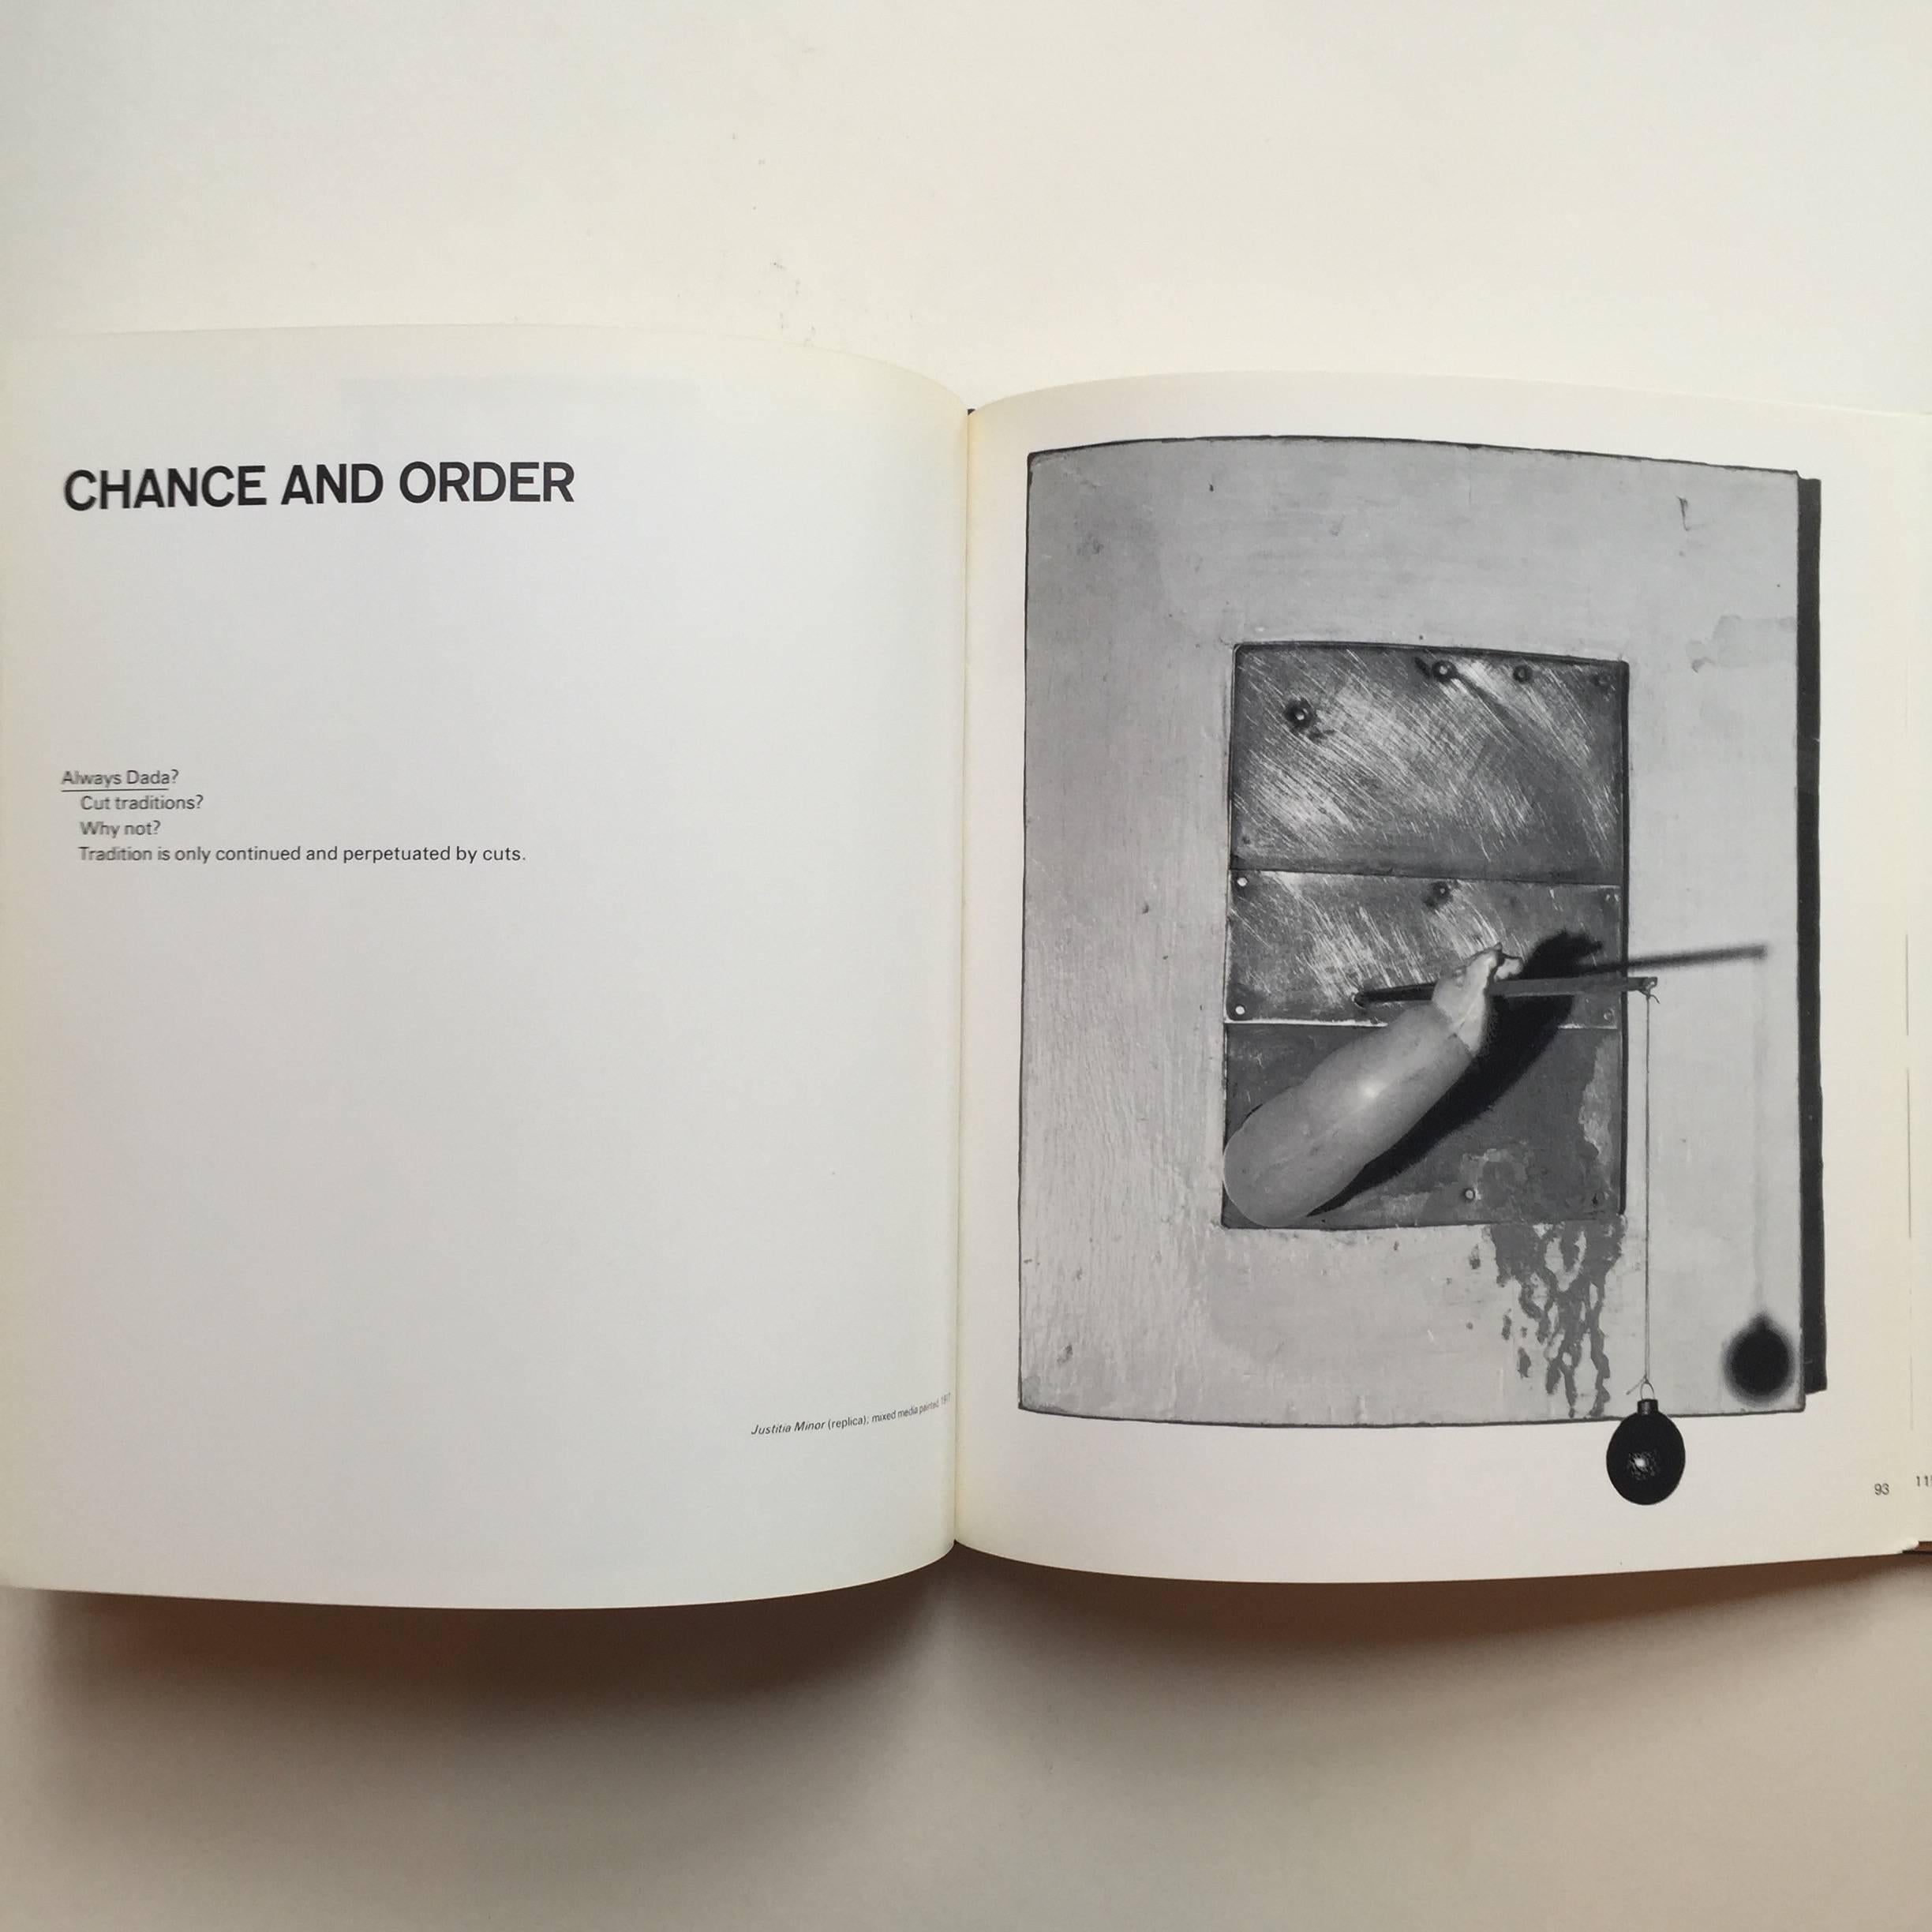 First edition, published by Thames and Hudson, 1971.

Pioneer of Dada and the Experimental Film.

This book is both an autobiography of Hans Richter’s life, and an artist monograph. Richter’s many anecdotes, words of wisdom and poems sit hand in